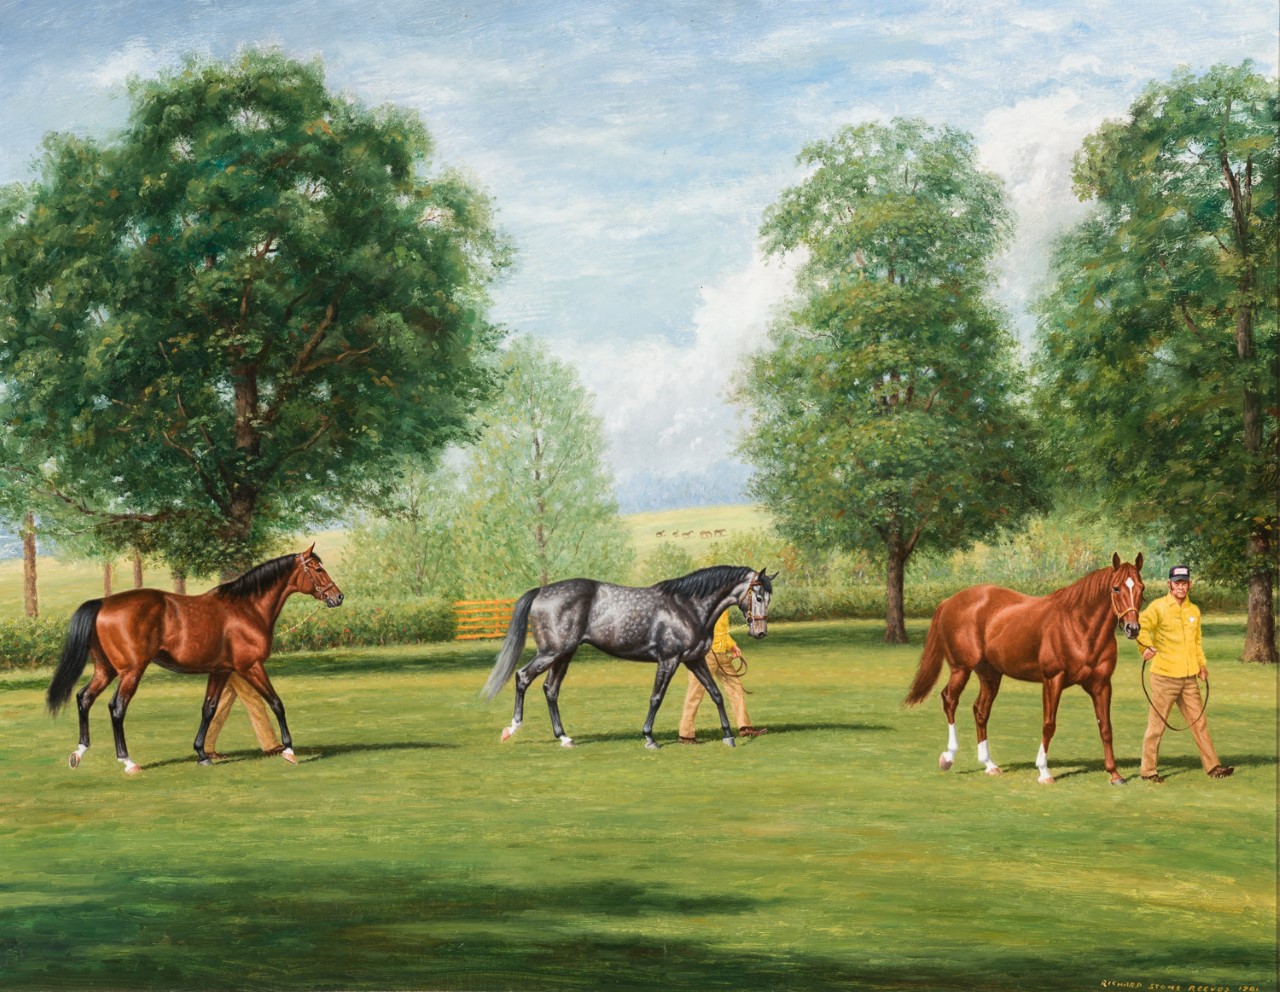 Coming under the hammer: This painting, ‘Three Kings, Claiborne Farm (Nijinsky II, Spectacular Bid and Secretariat)’, is by Richard Stone Reeves